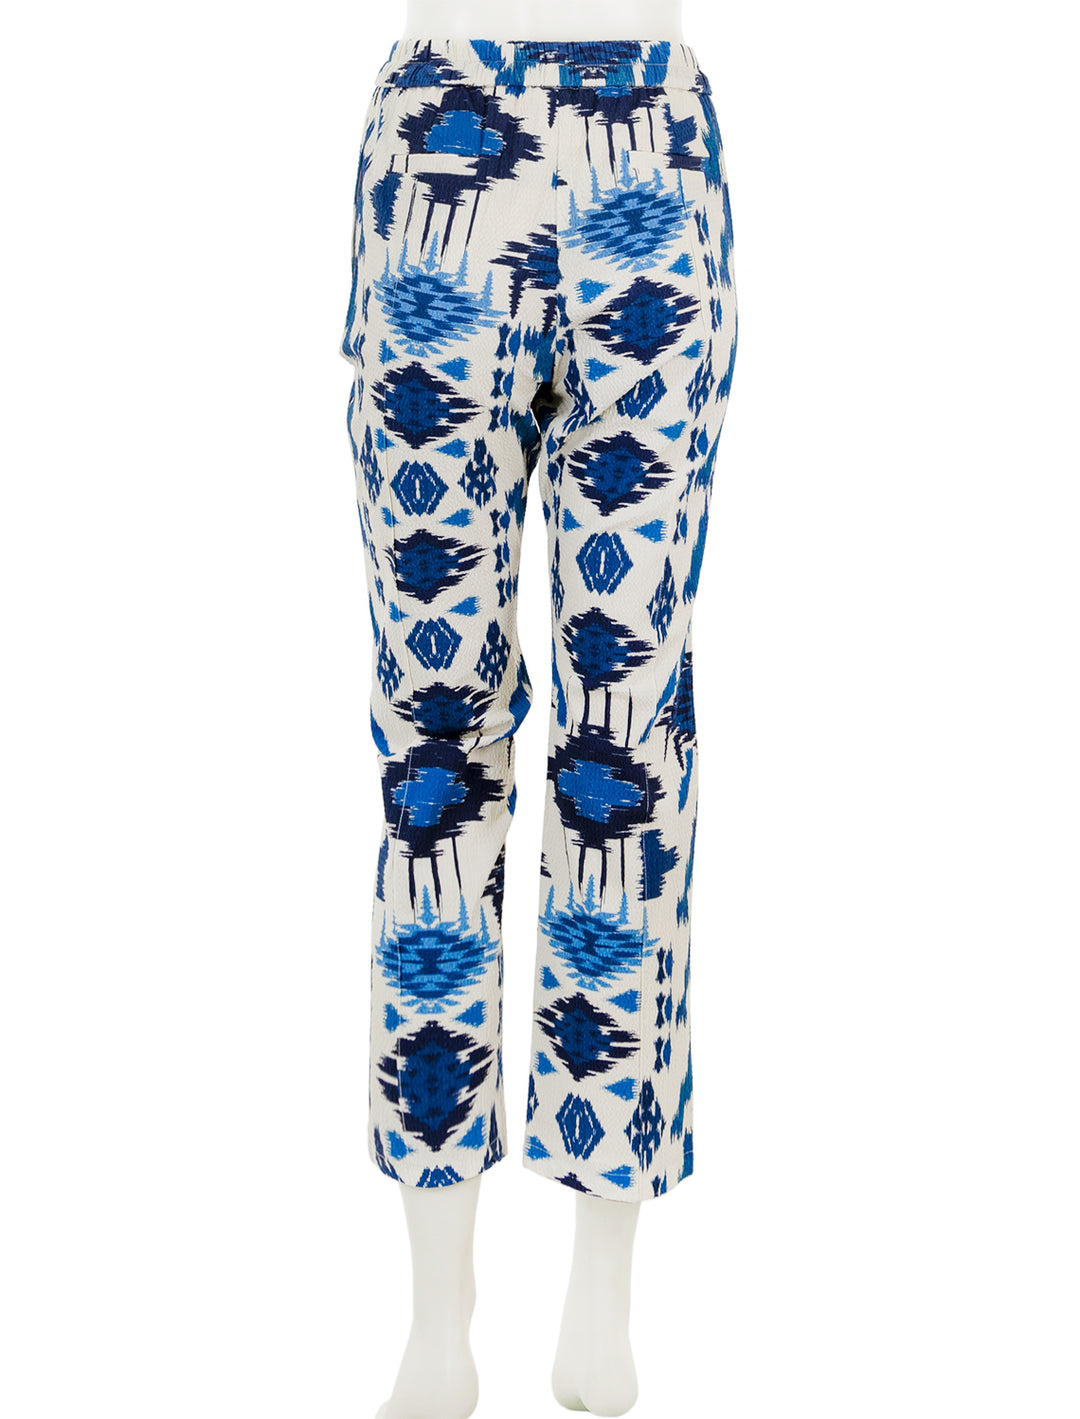 Back view of Vilagallo's clarise pant in blue ikat.